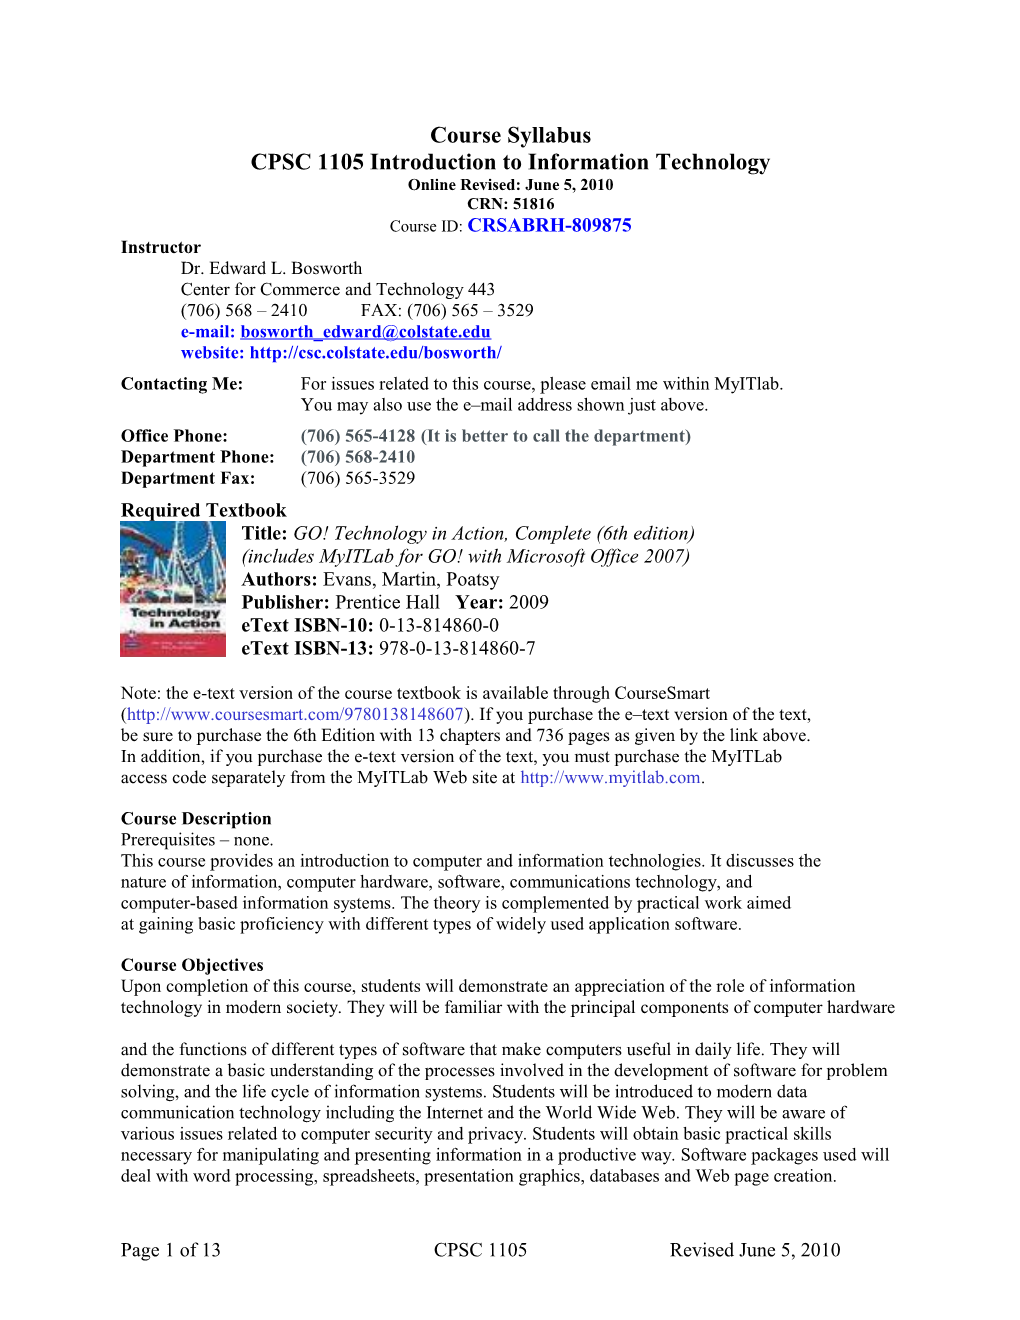 CPSC 1105 Introduction to Information Technology